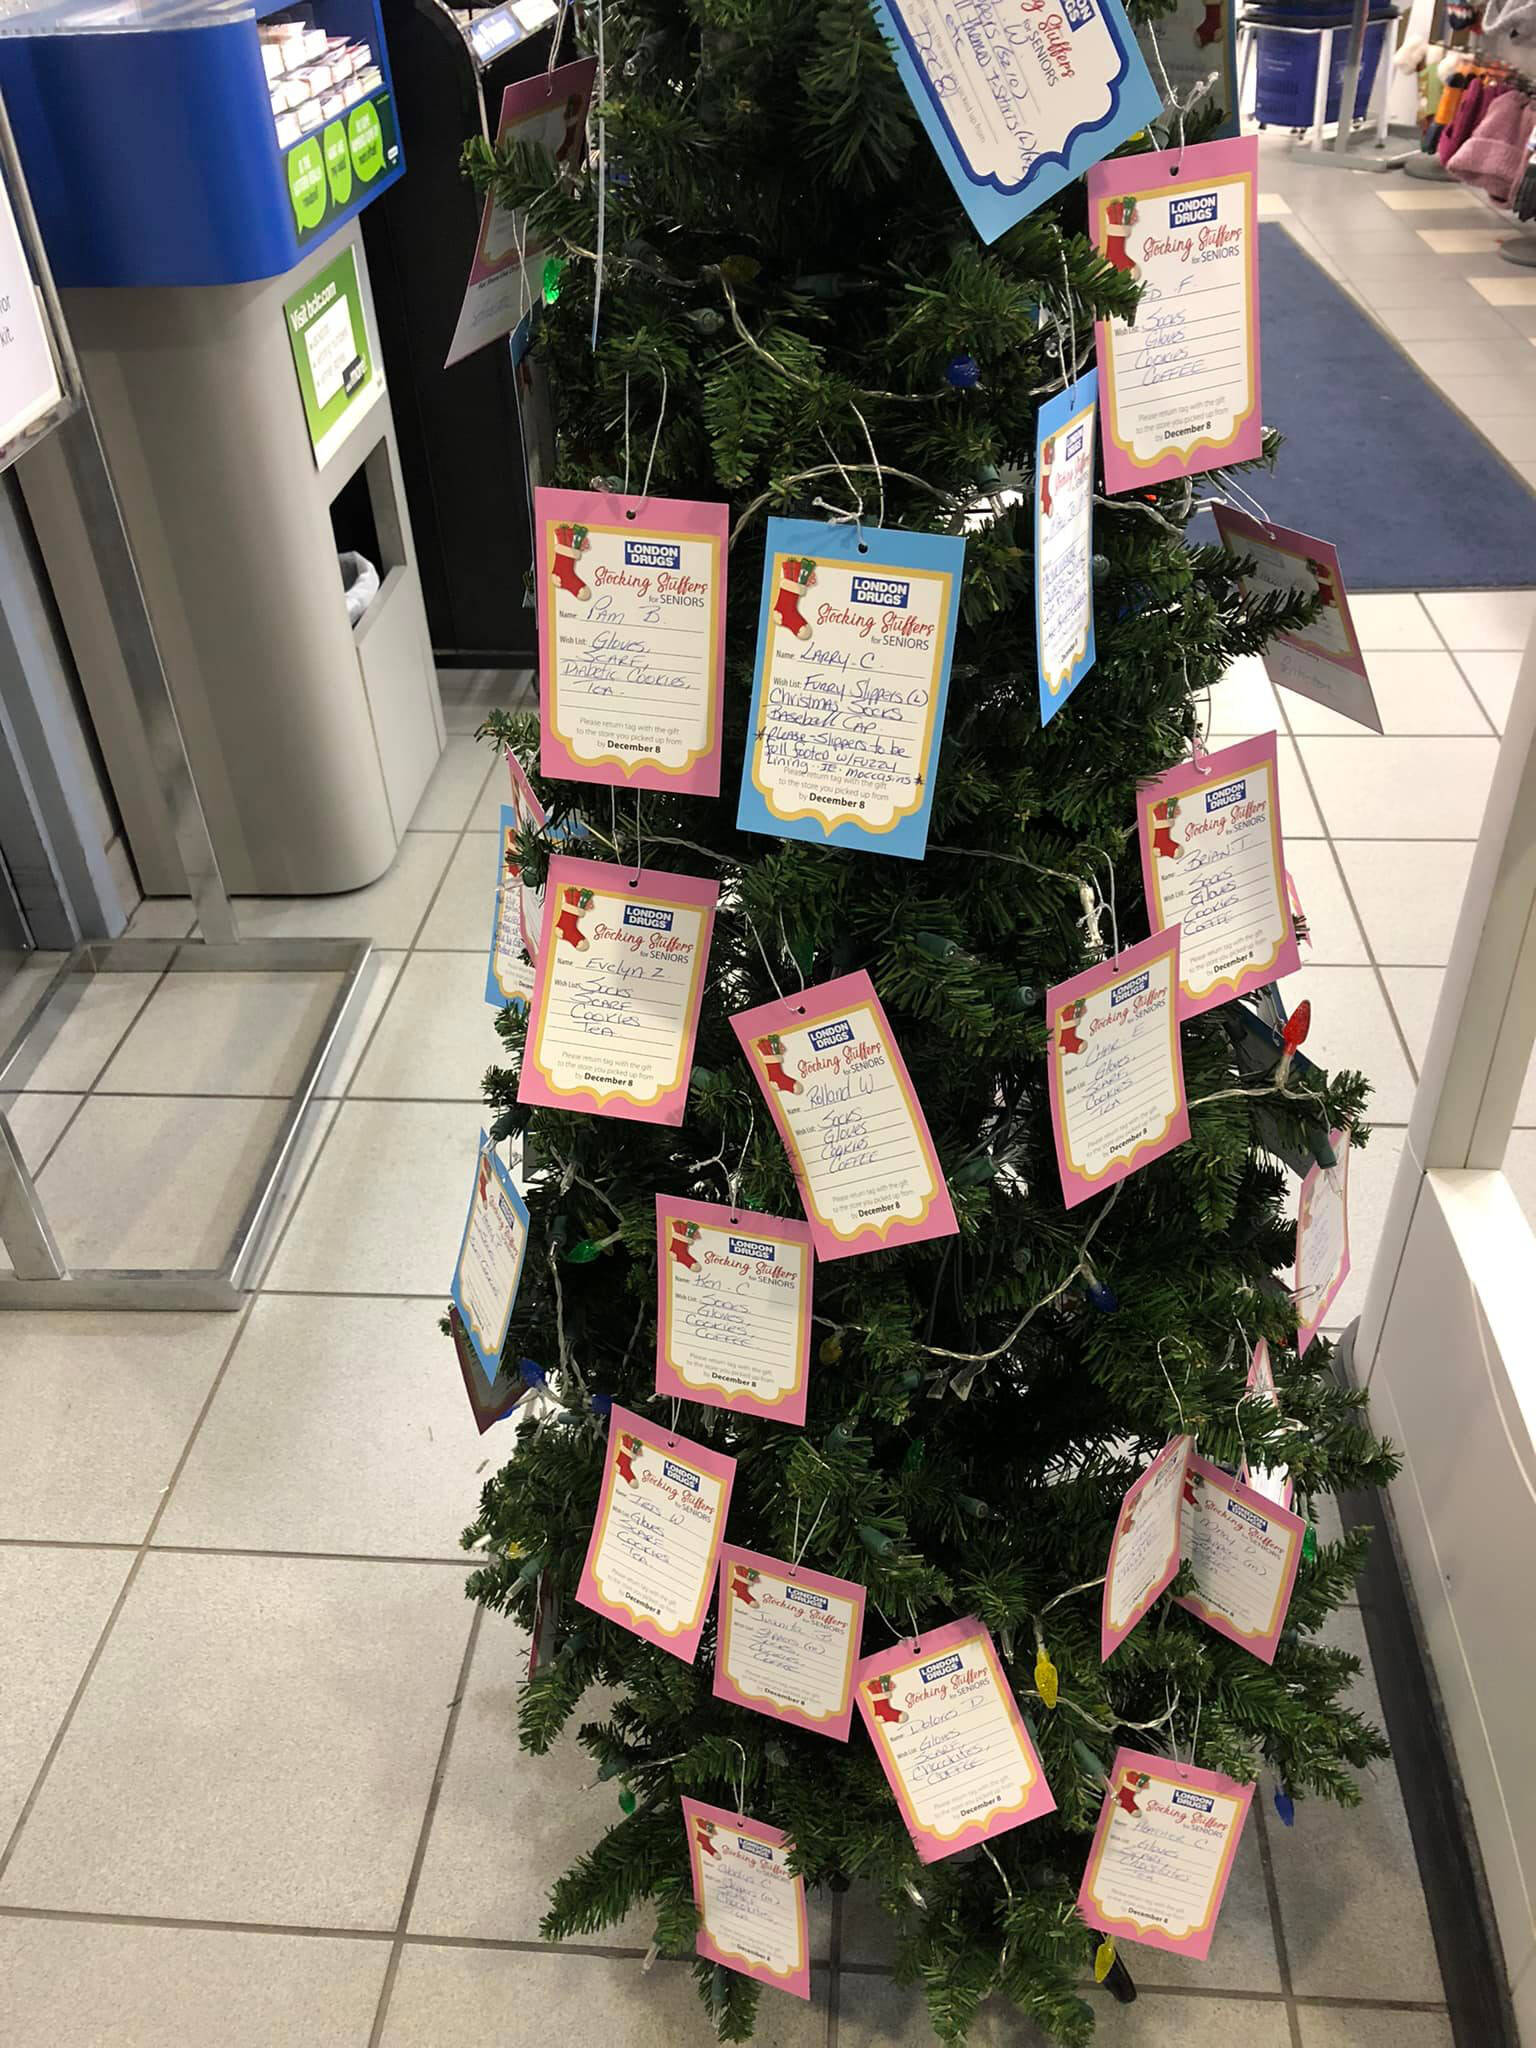 The Stocking Stuffers for Seniors tree is back up at the London Drugs in Cherry Lane Mall in Penticton. (Jenn Waid)